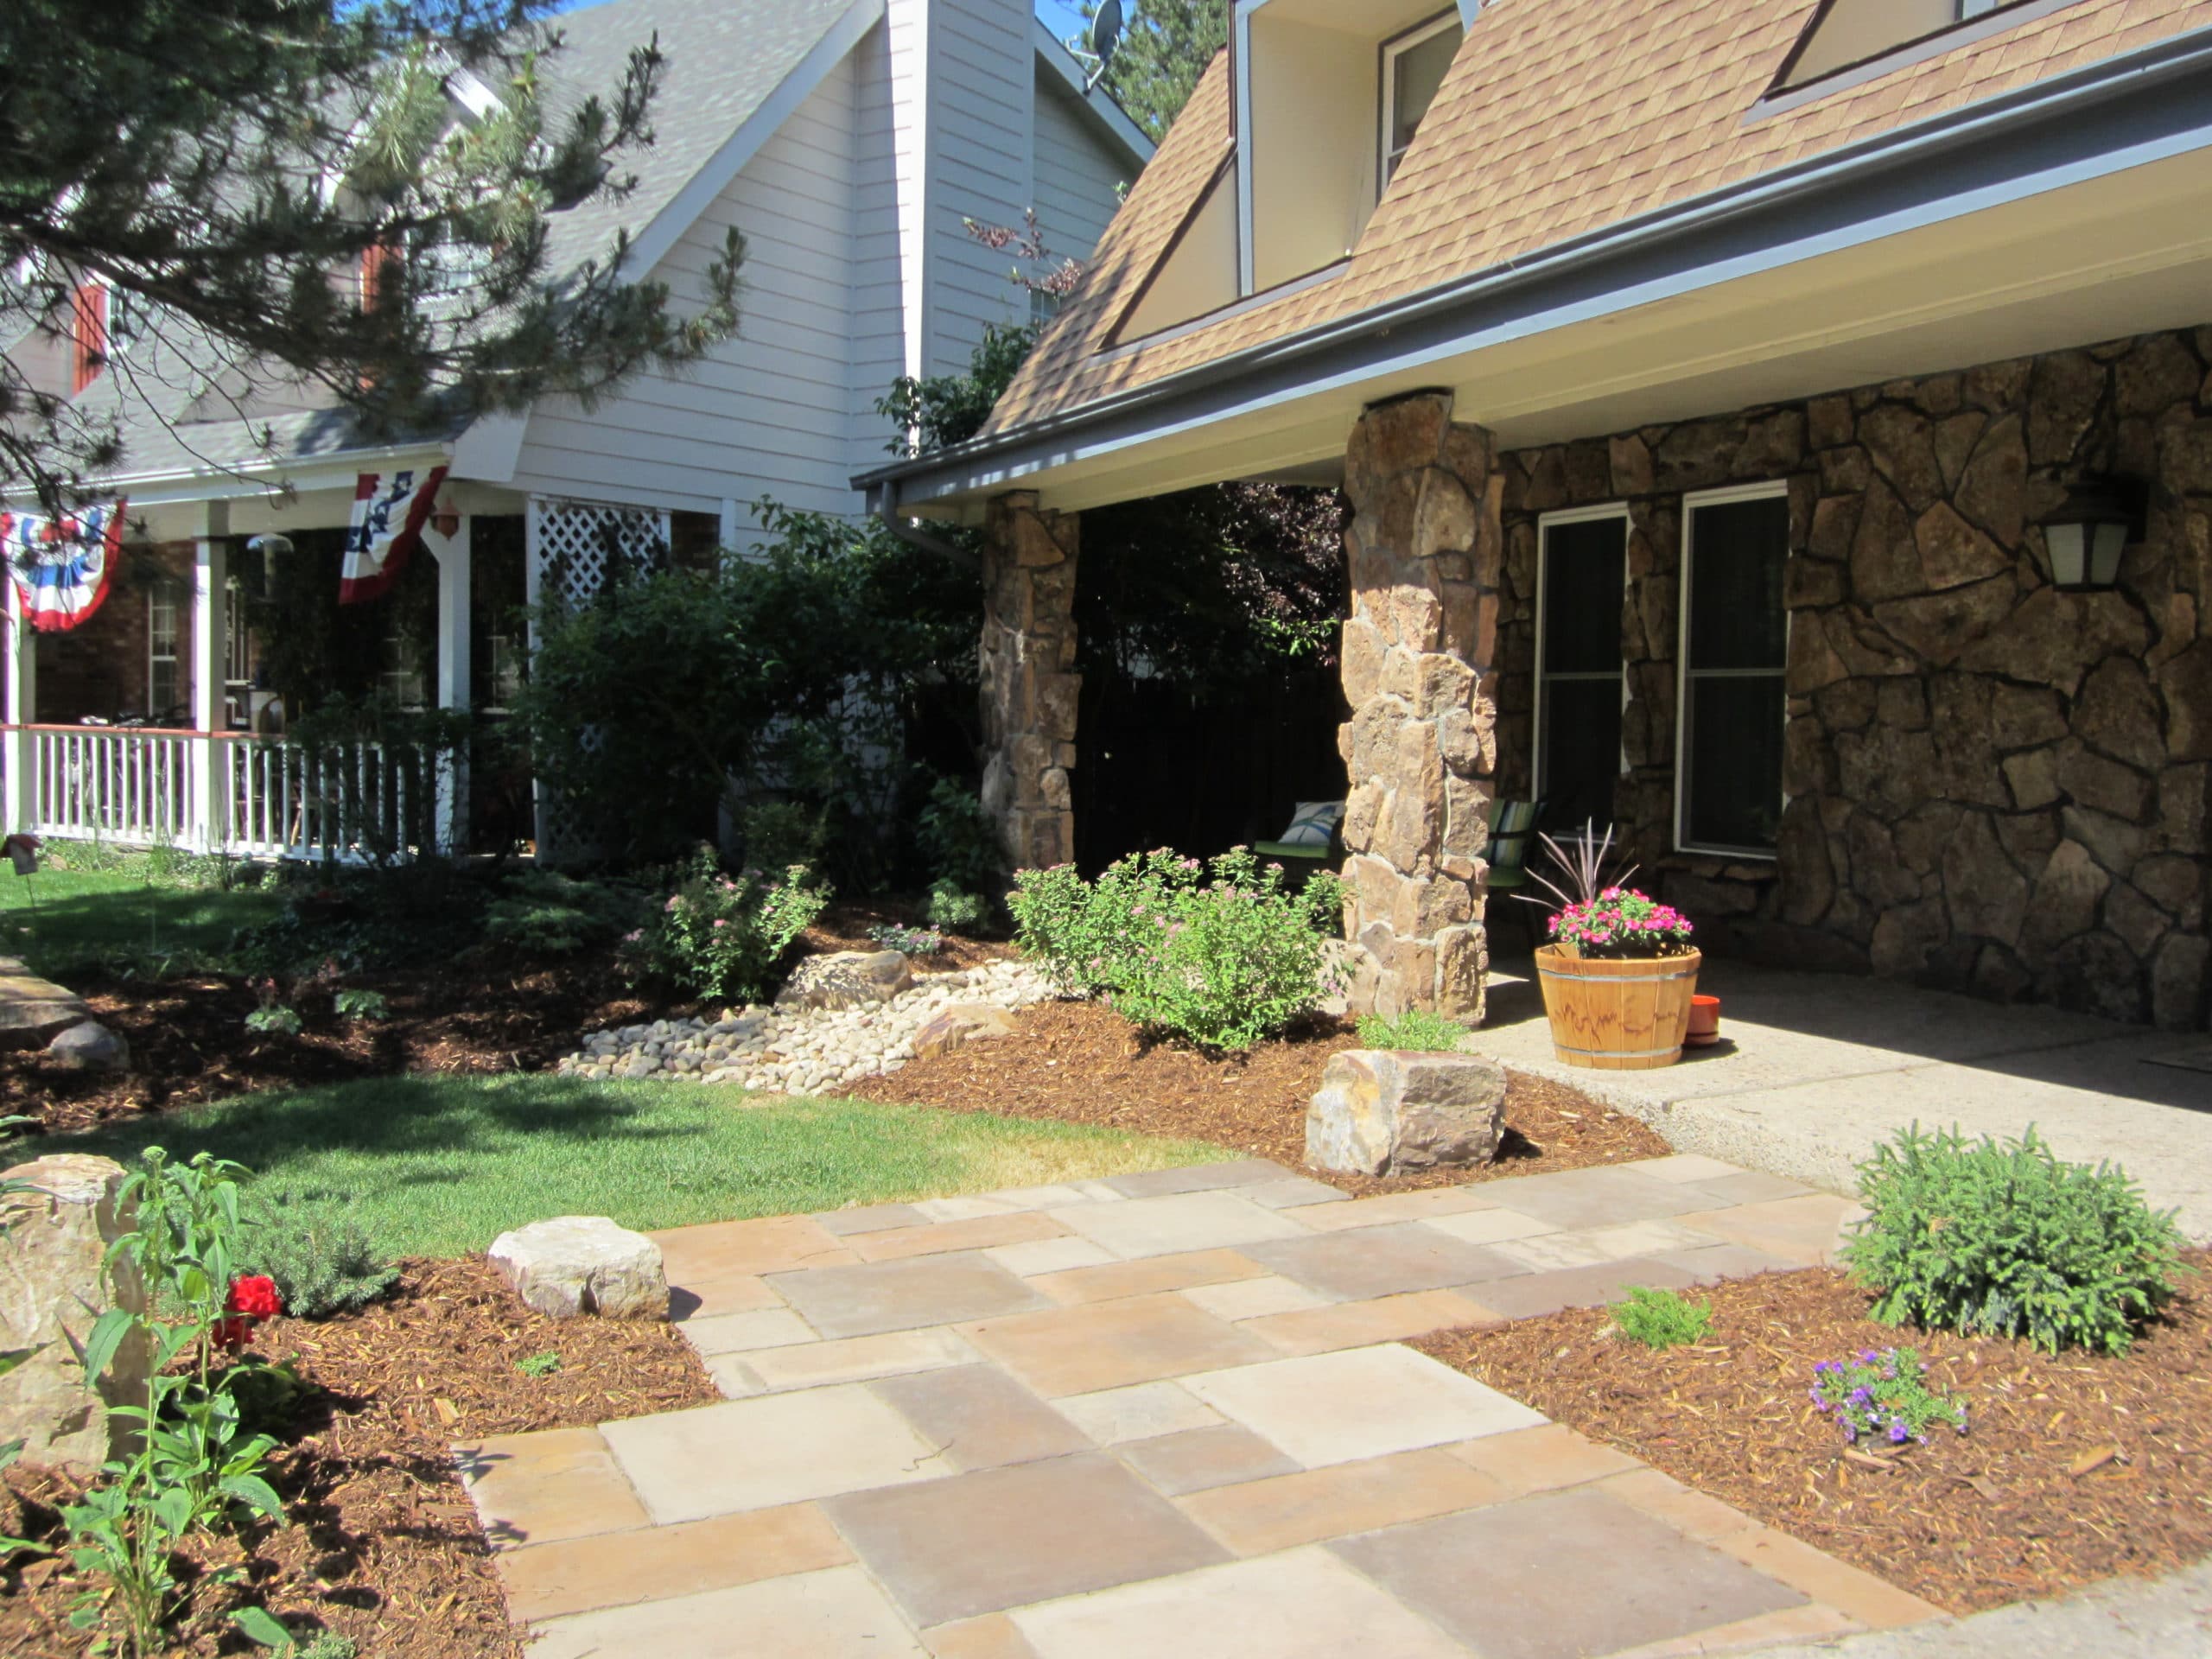 Brick laid path to front porch edged by grass and mulch with plants and bushes.